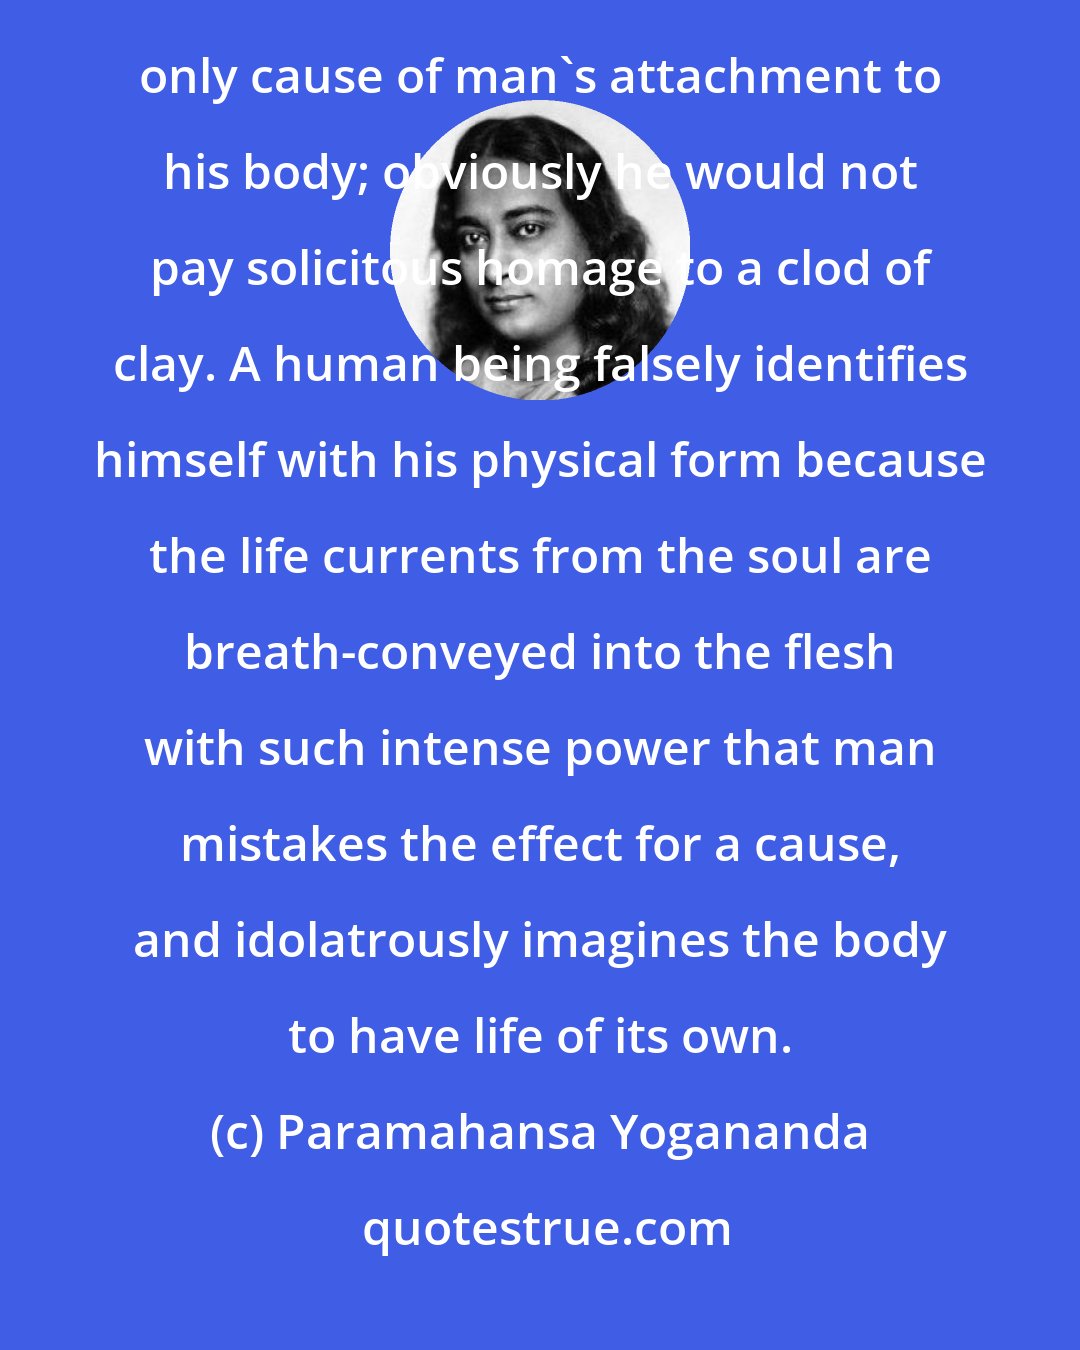 Paramahansa Yogananda: The reflection, the verisimilitude, of life that shines in the fleshly cells from the soul source is the only cause of man's attachment to his body; obviously he would not pay solicitous homage to a clod of clay. A human being falsely identifies himself with his physical form because the life currents from the soul are breath-conveyed into the flesh with such intense power that man mistakes the effect for a cause, and idolatrously imagines the body to have life of its own.